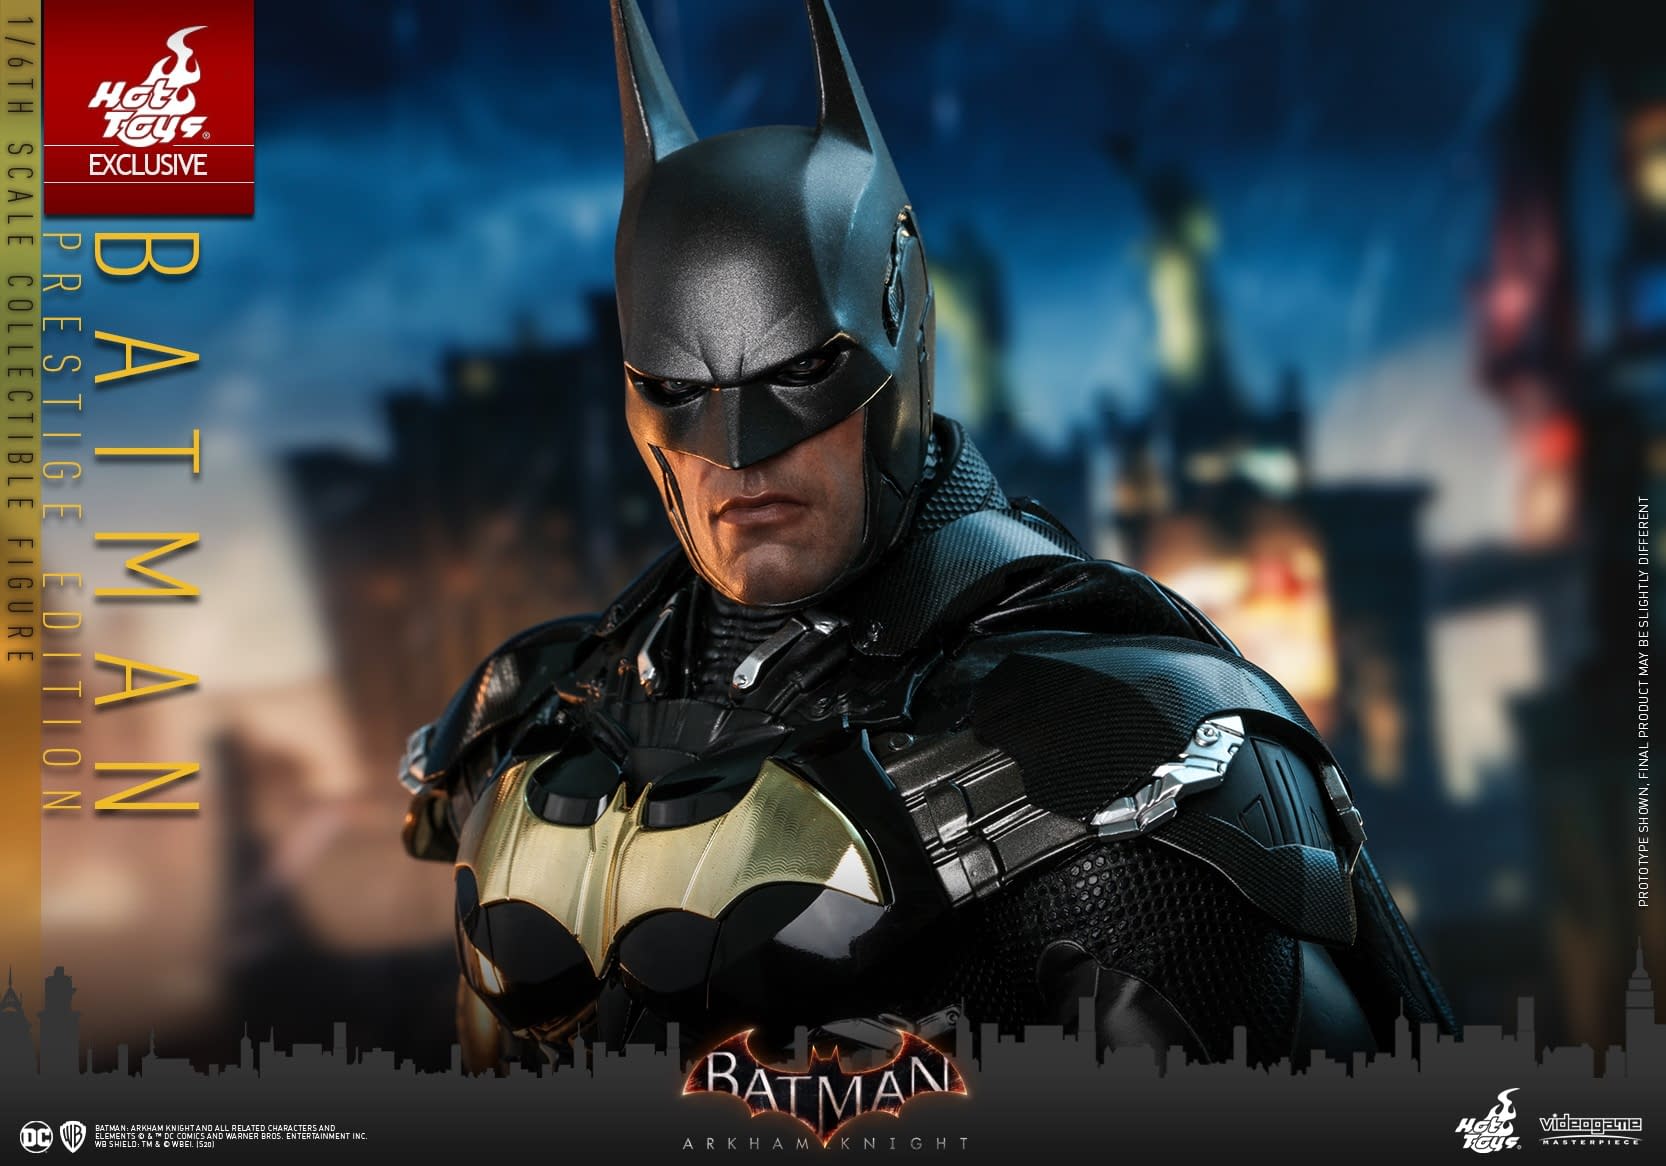 Batman Goes Gold With New "Arkham Knight" Hot Toys Figure 